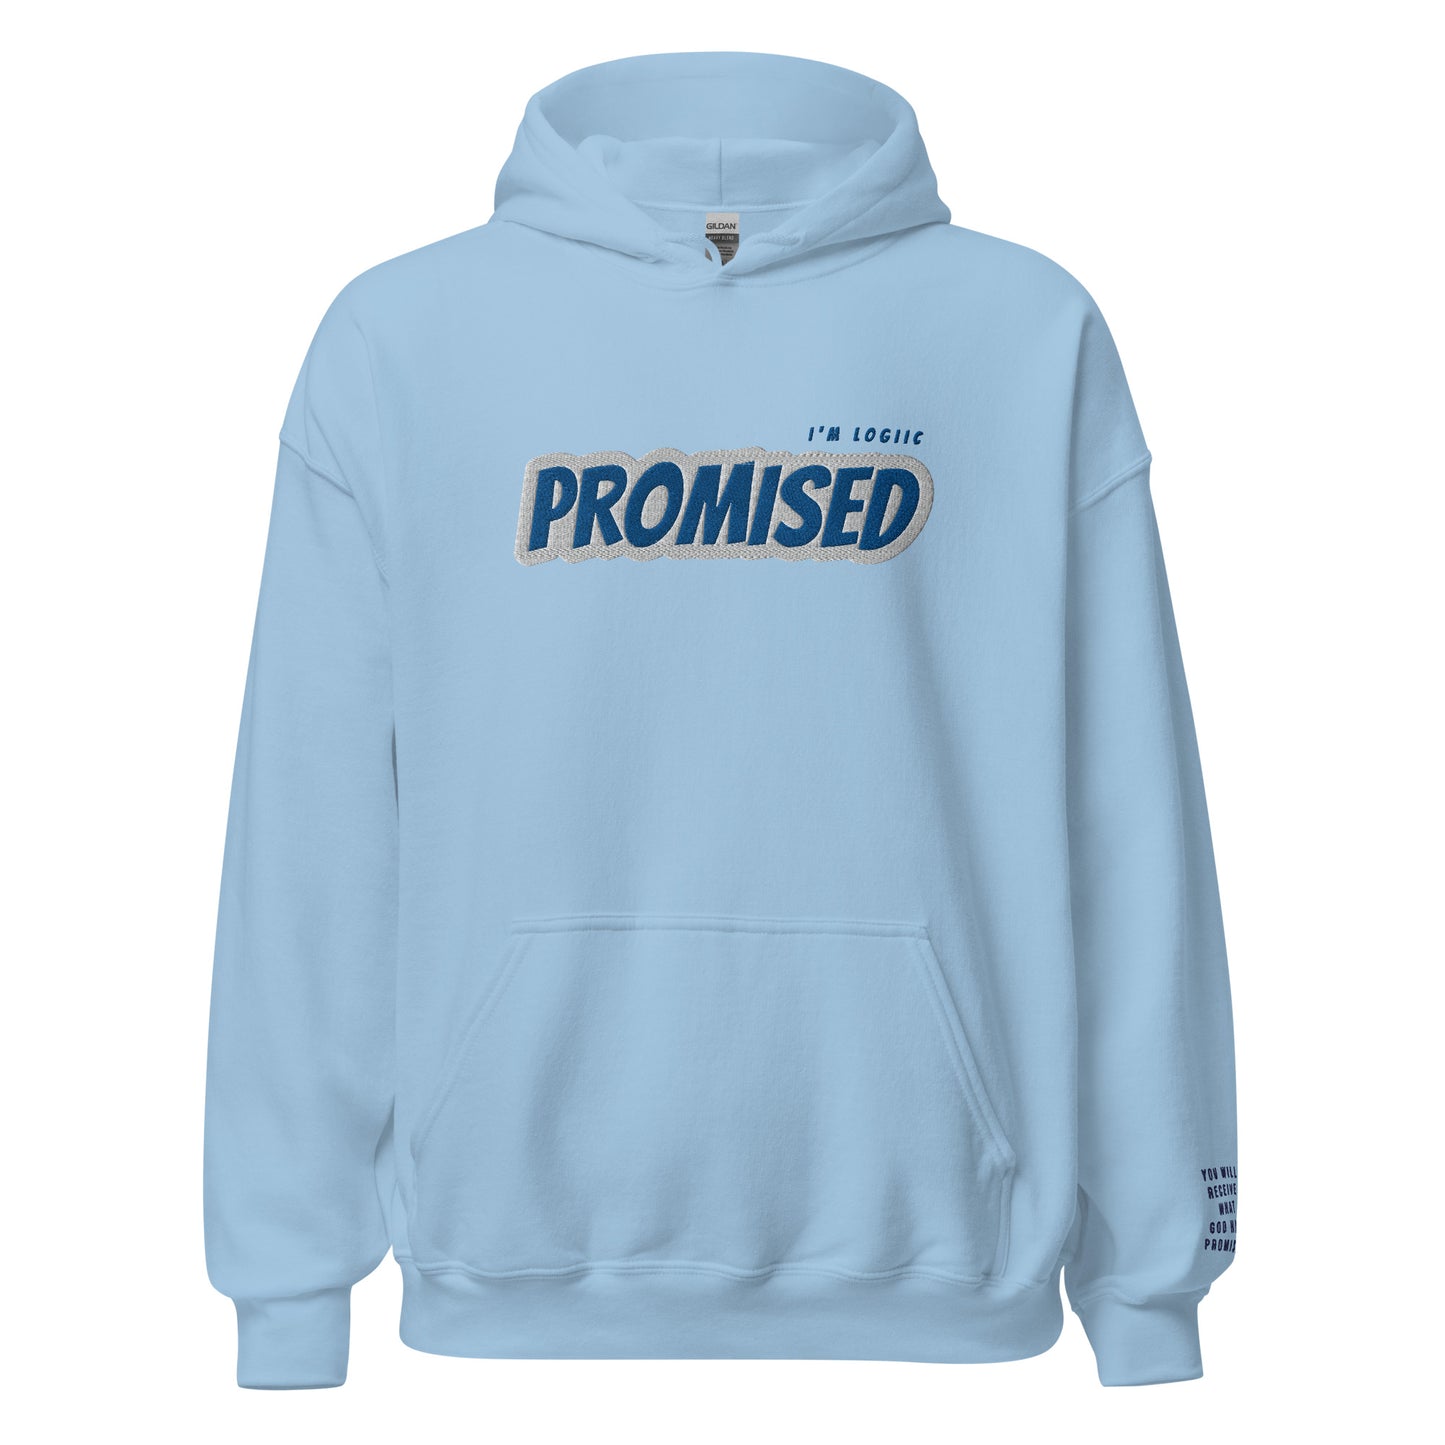 Promised Embroidered Unisex Hoodie - S - Shirts & Tops